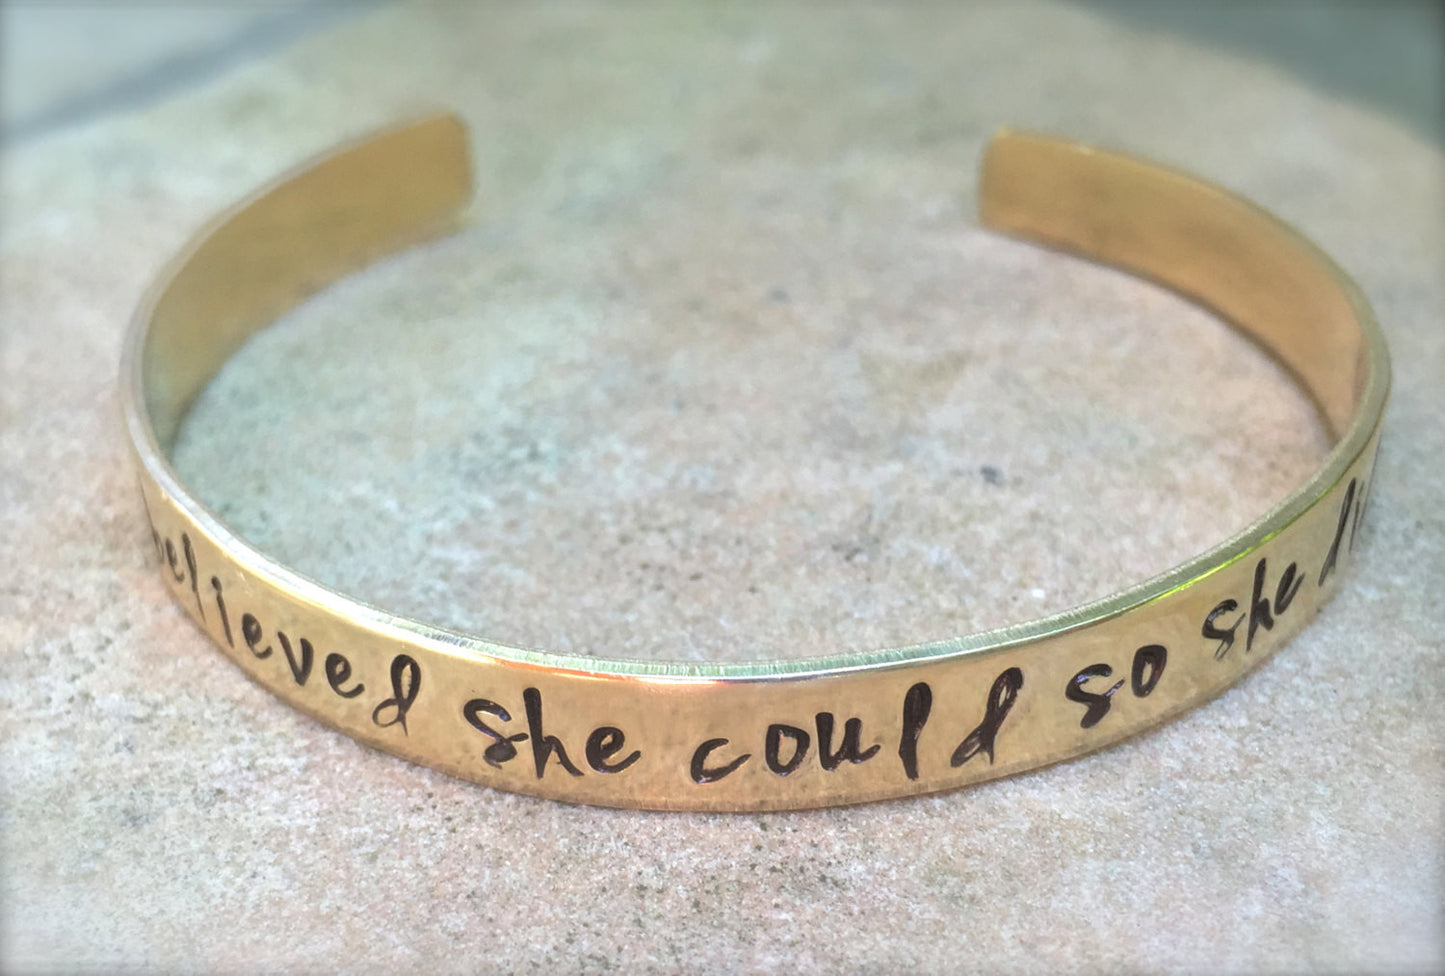 Graduation Gift, She Believed She Could So She Did Bracelet, Graduation 2016, Gifts for Graduation, Personalized Cuff, natashaaloha - Natashaaloha, jewelry, bracelets, necklace, keychains, fishing lures, gifts for men, charms, personalized, 